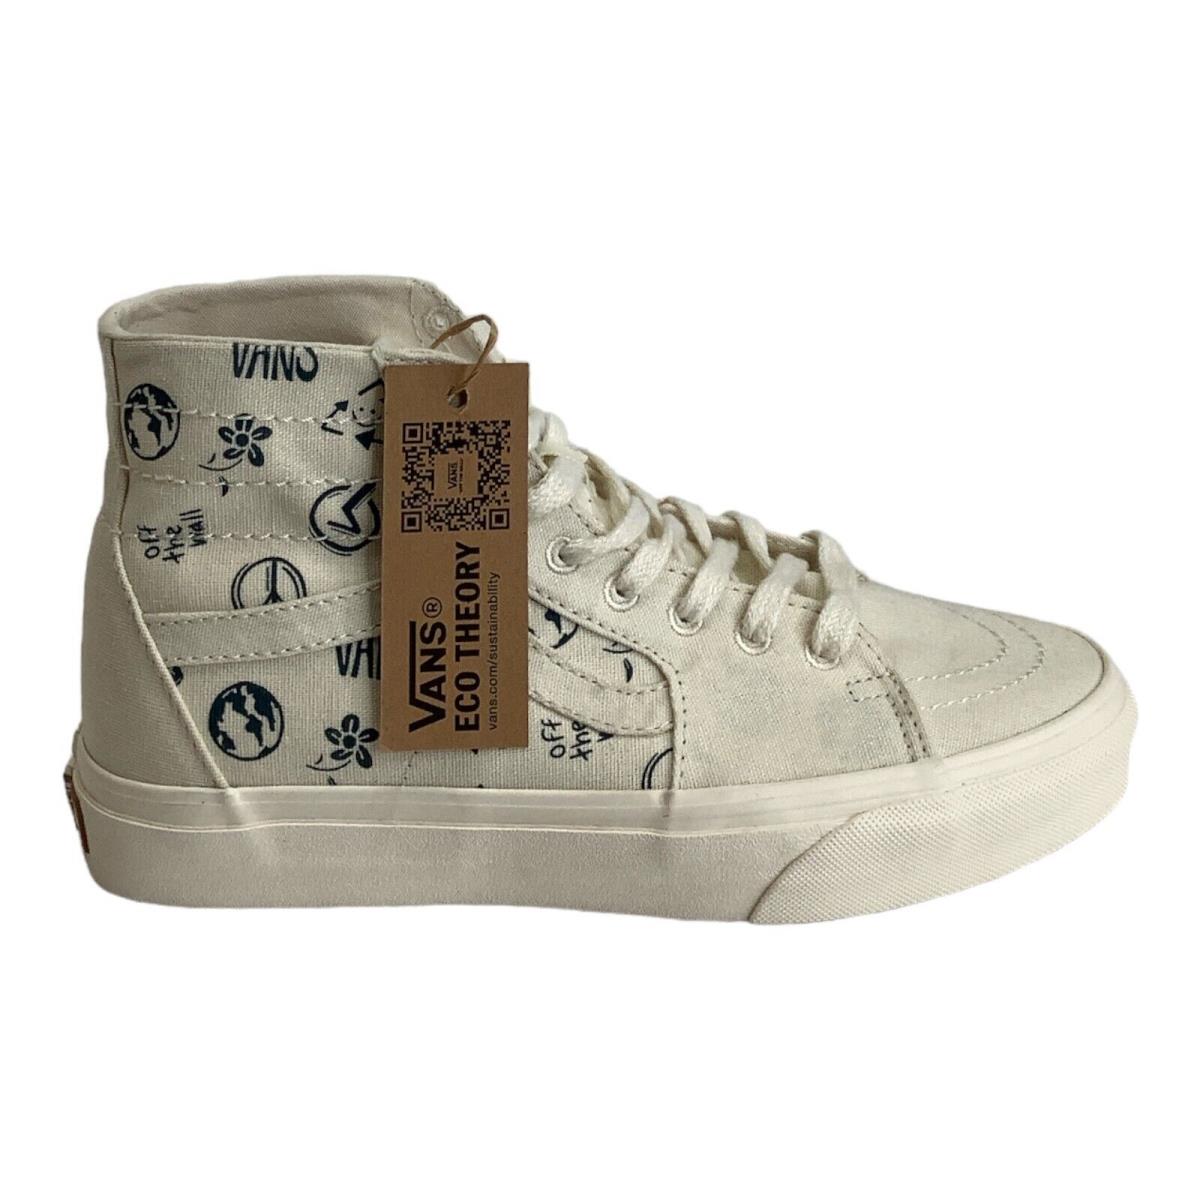 Vans Sk8-Hi Tapered Skating Shoes Eco Theory in Our Hands M 7 W 8.5 EU 39